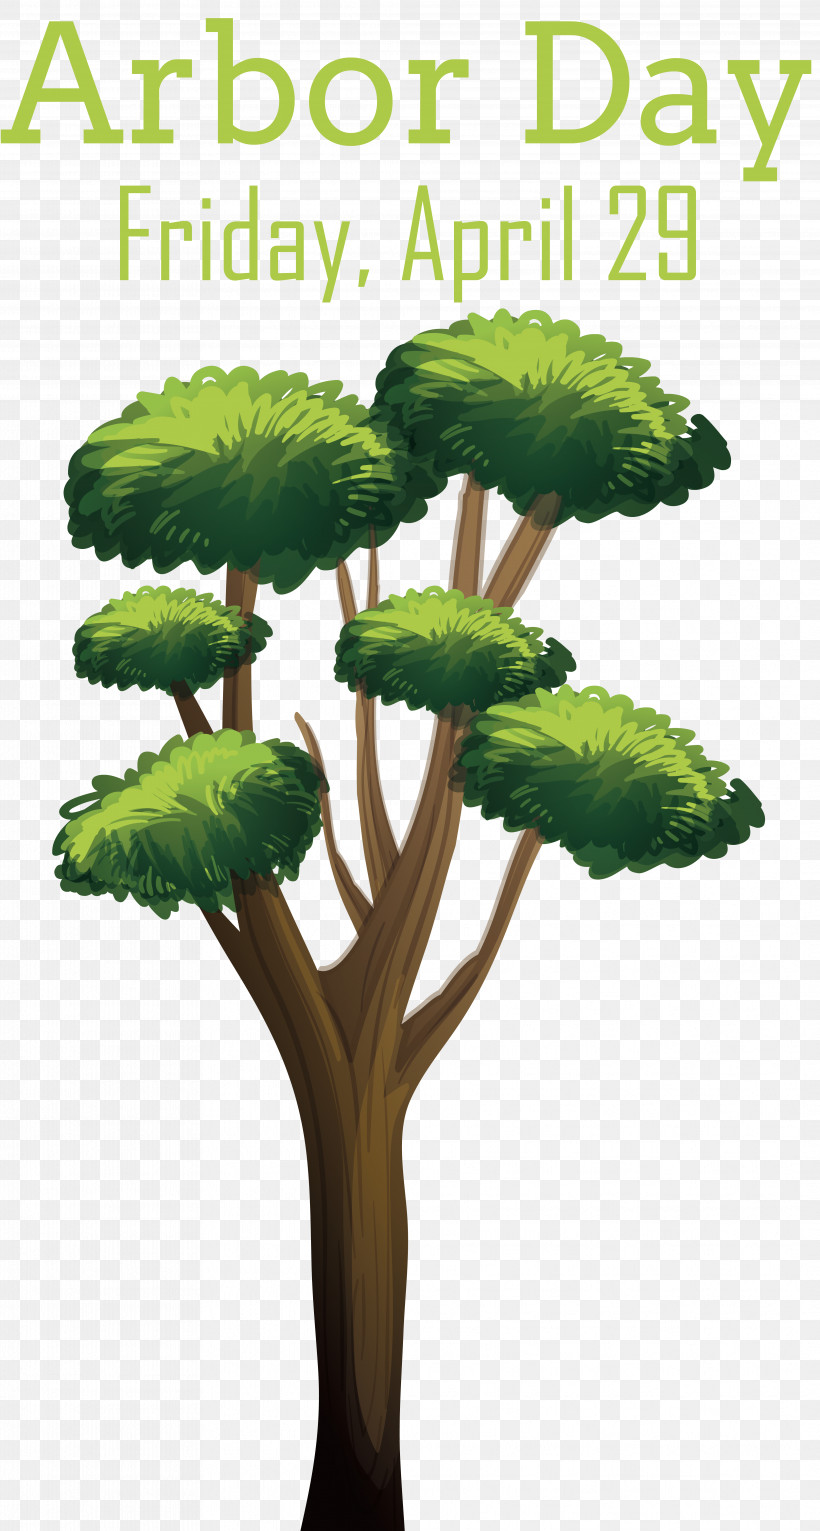 Royalty-free Tree Pixers Branch Vector, PNG, 4147x7744px, Royaltyfree, Branch, Pixers, Tree, Vector Download Free